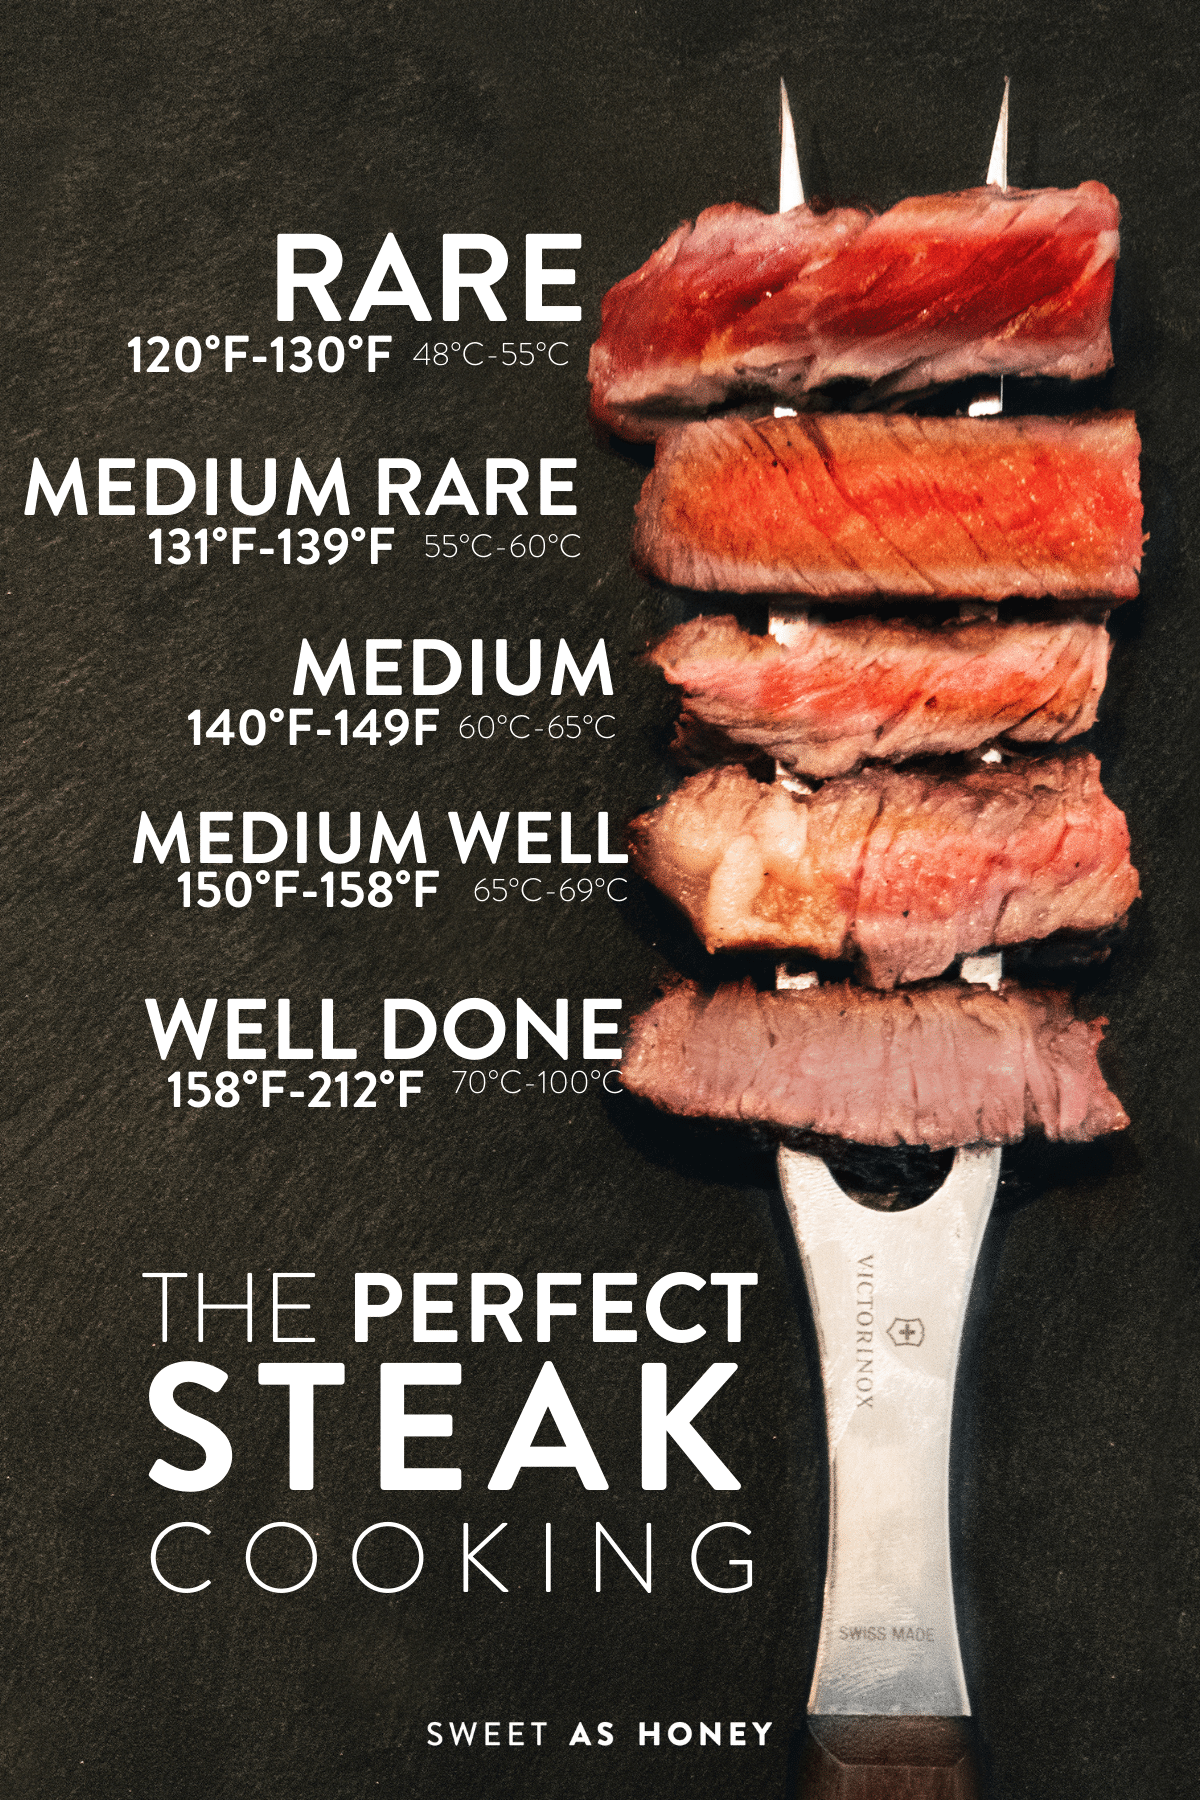 Steak Cooking Levels- How To Cook The Perfect Steak - Sweet As Honey